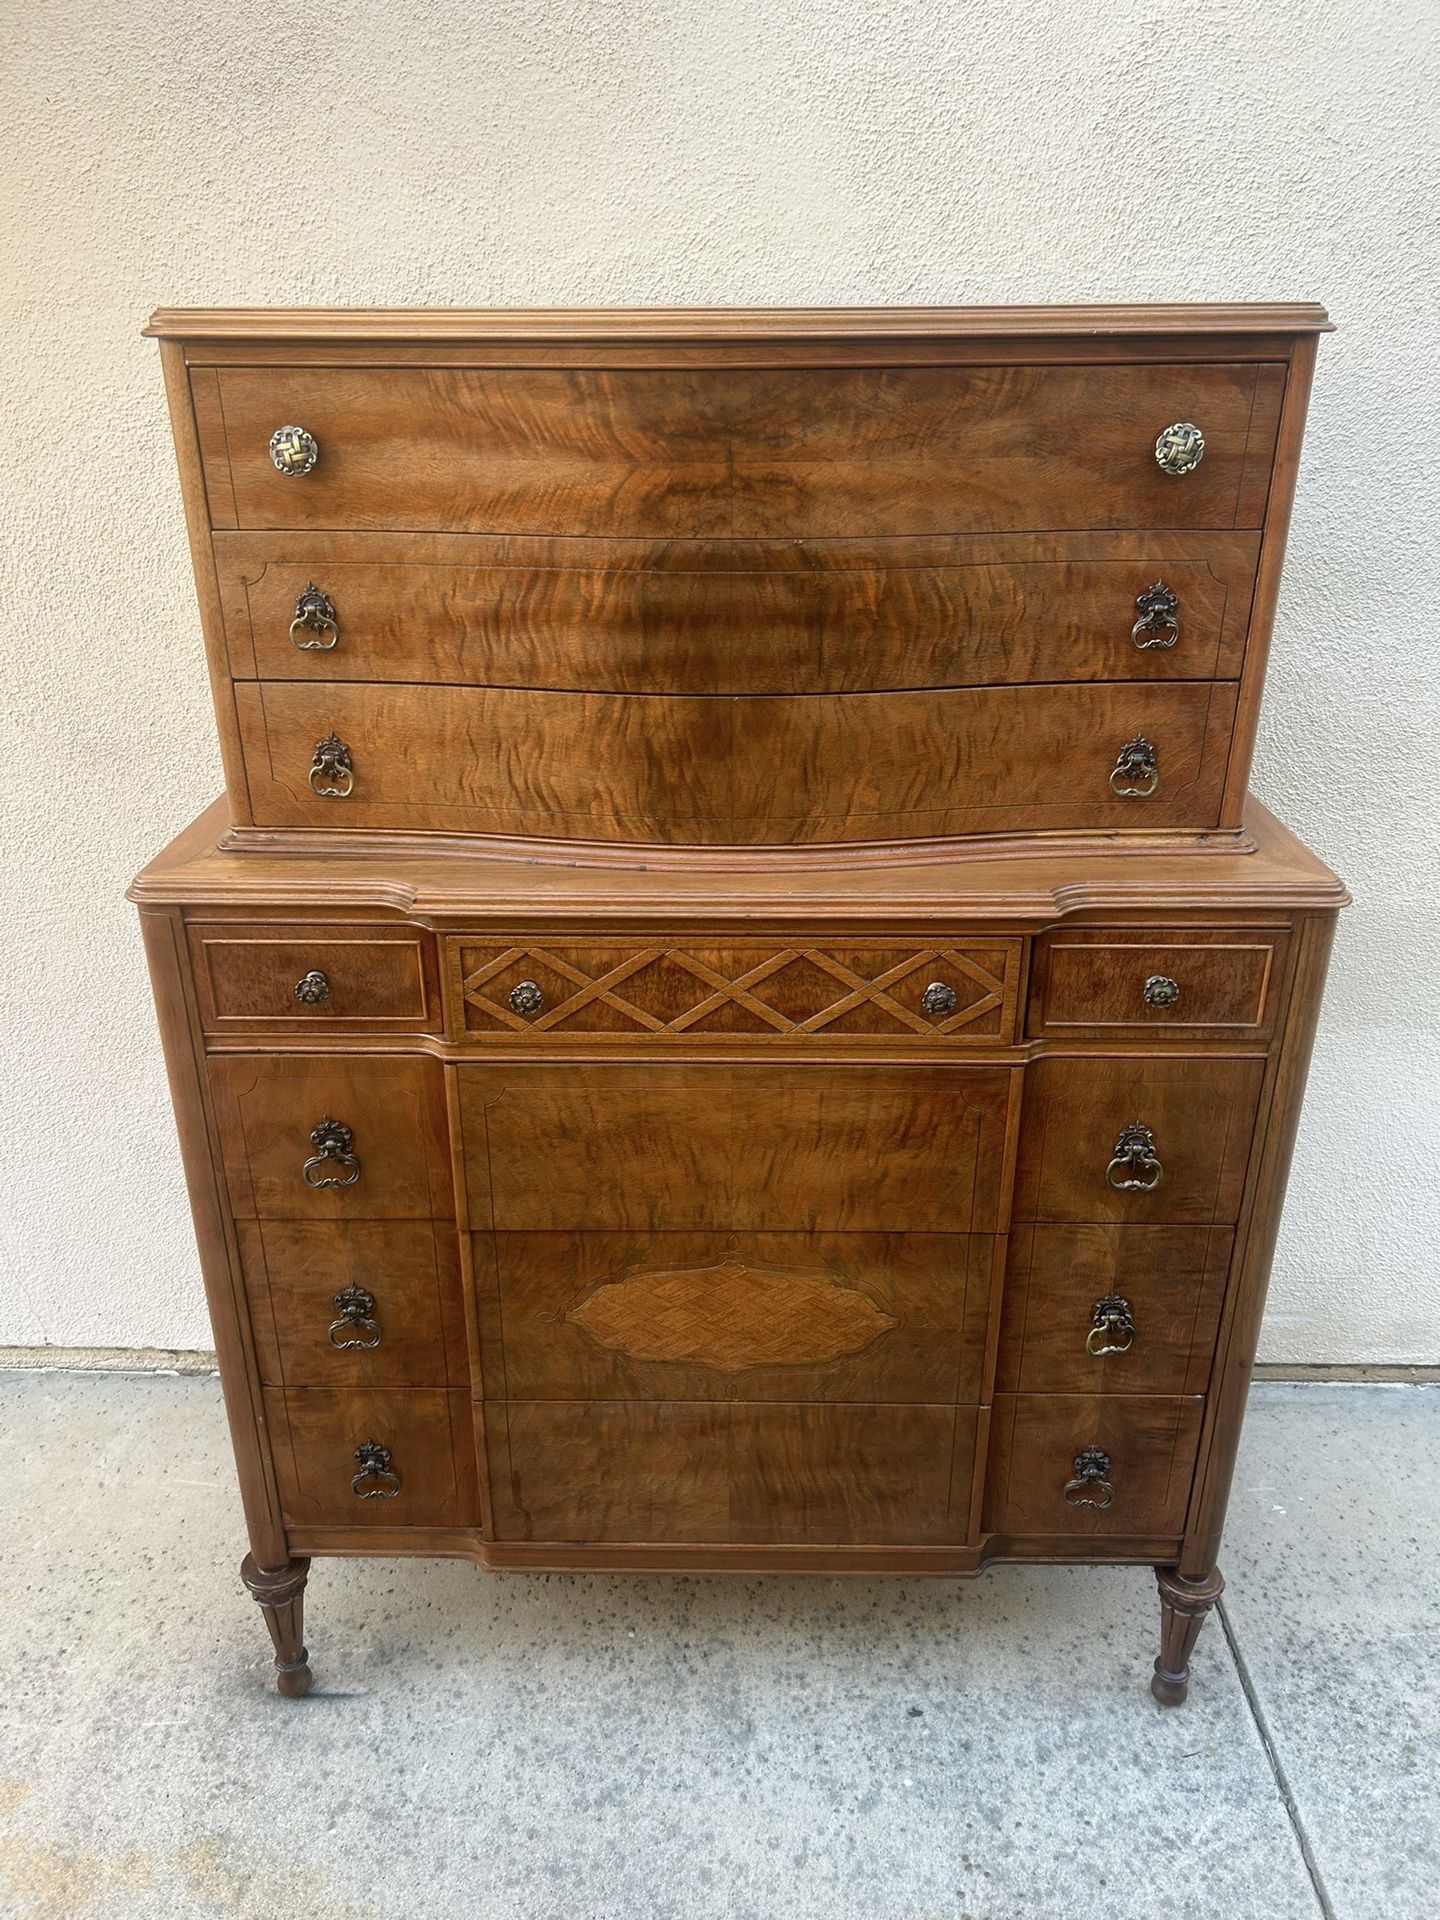 BEAUTIFUL LARGE ANTIQUE TALLBOY DRESSER CAN DELIVER LOCAL IF NEEDED